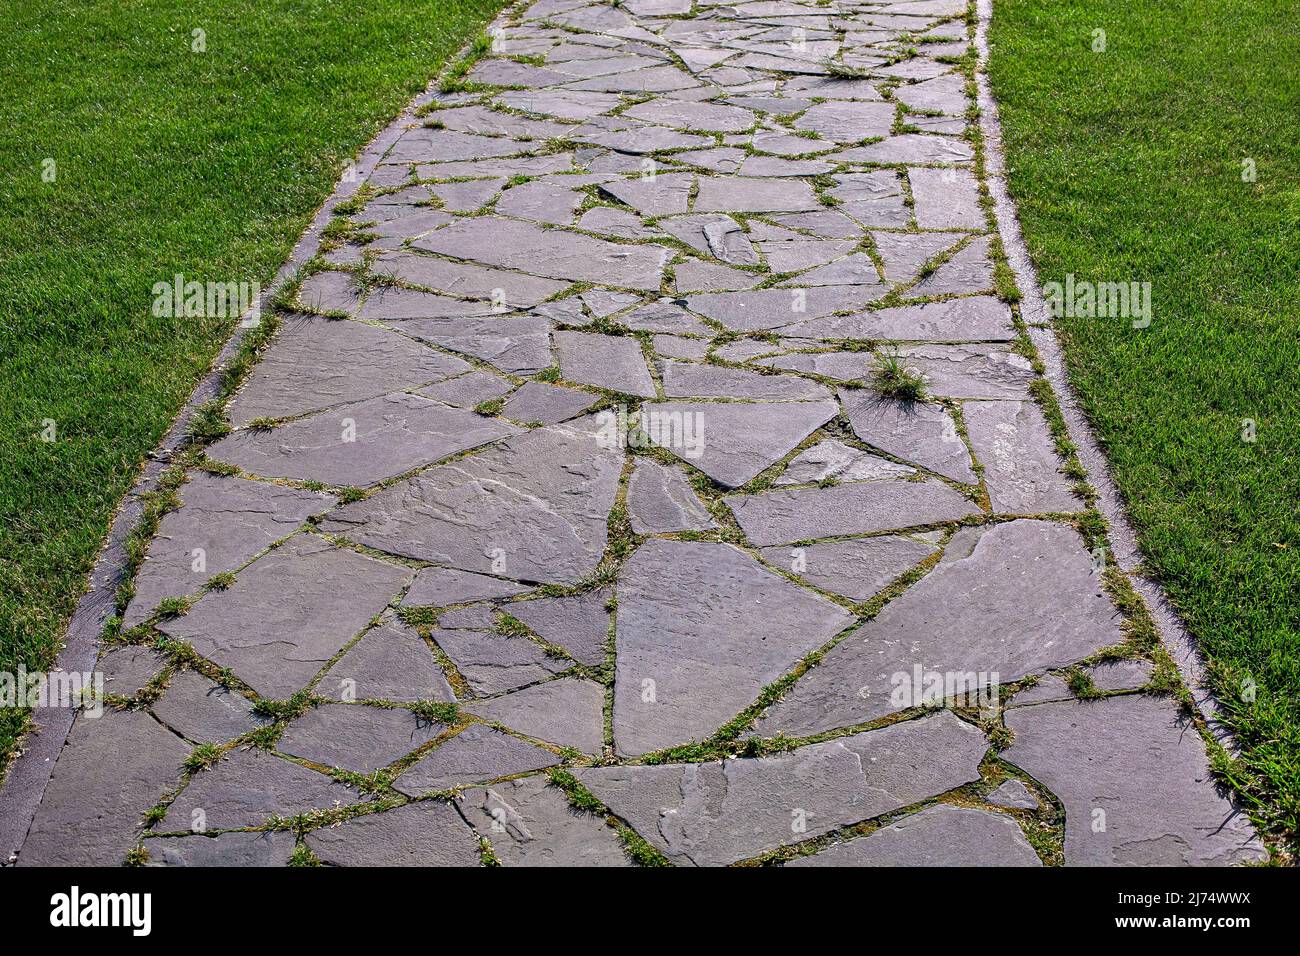 curved garden path made of natural stone paved with different size rough rock overgrown with grass in a park with a green lawn close-up of the turn wa Stock Photo